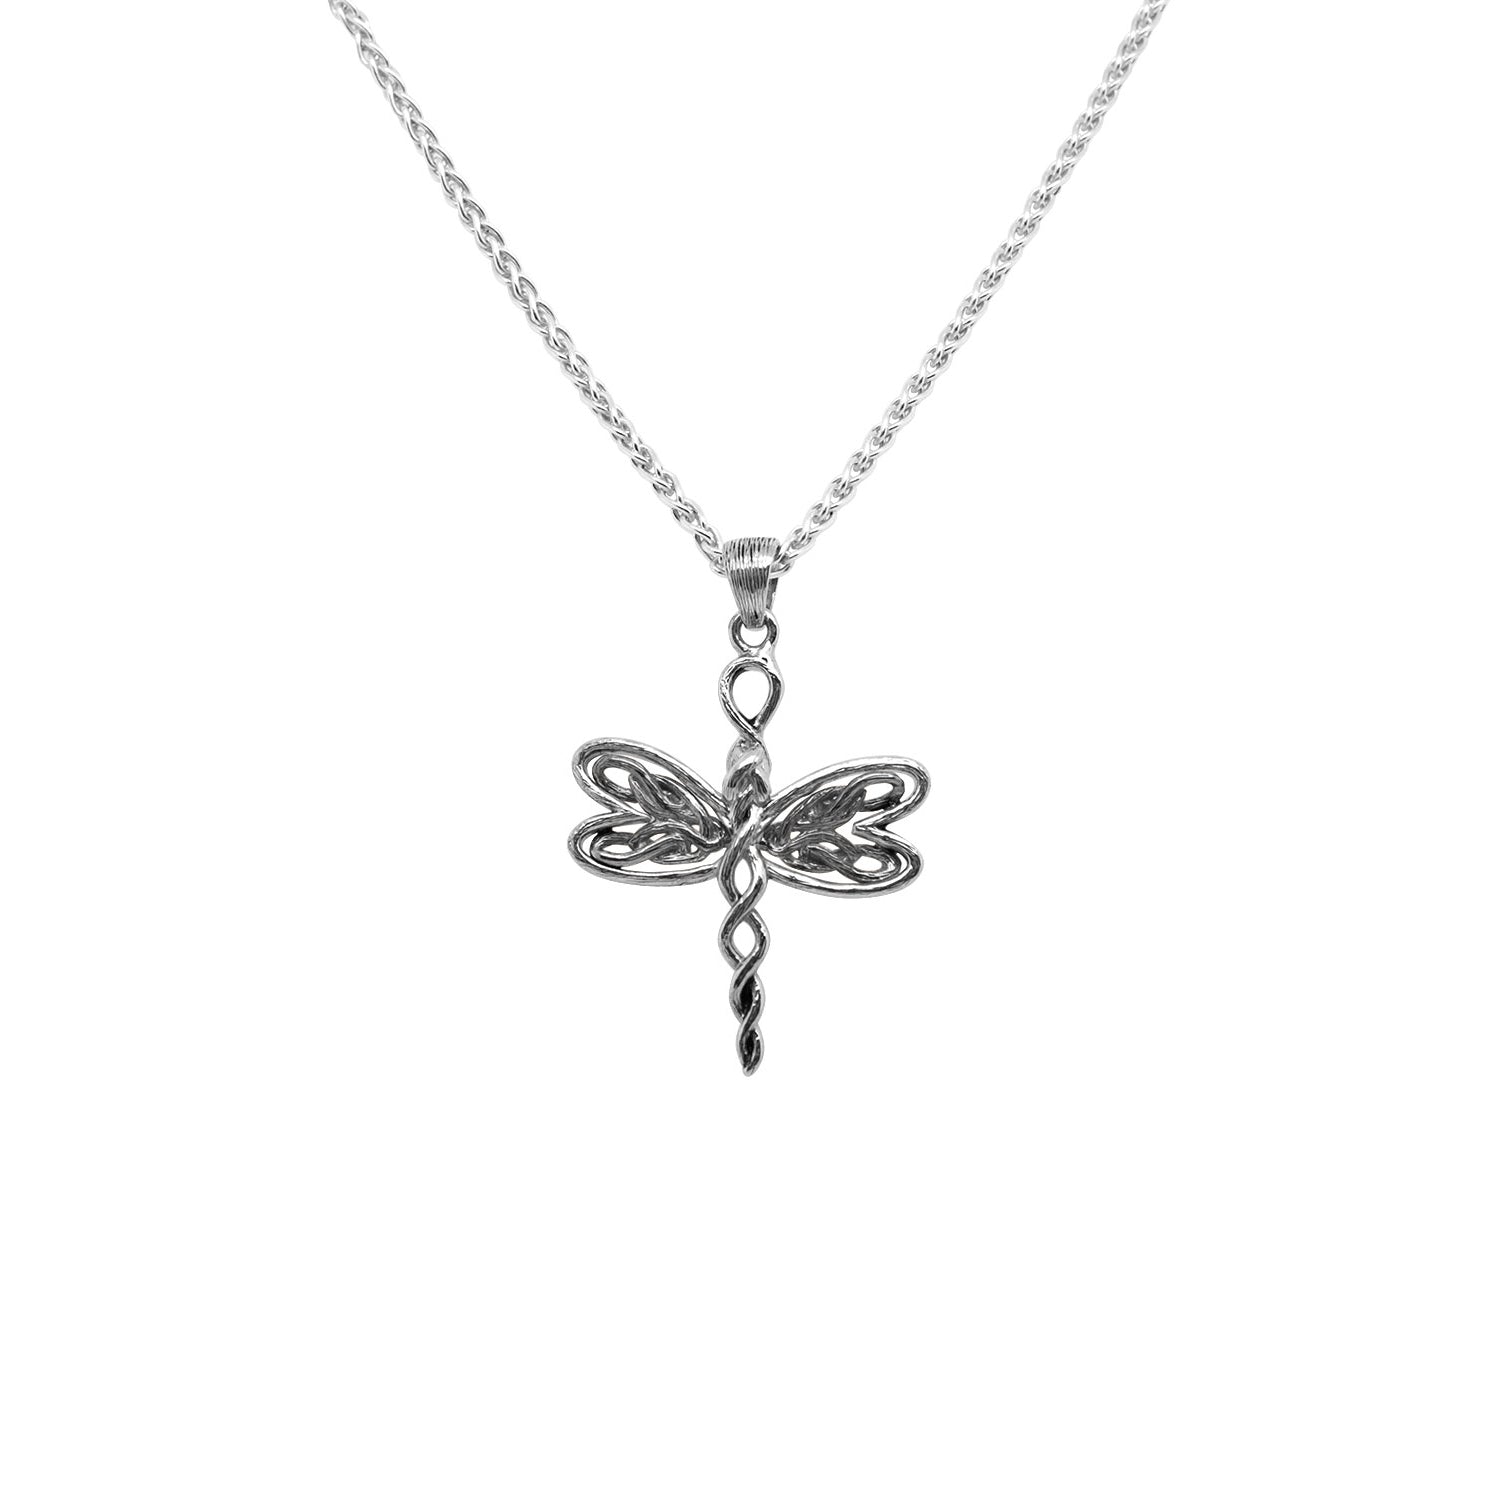 Pendant Rhodium Petite Dragonfly Pendant from welch and company jewelers near syracuse ny 